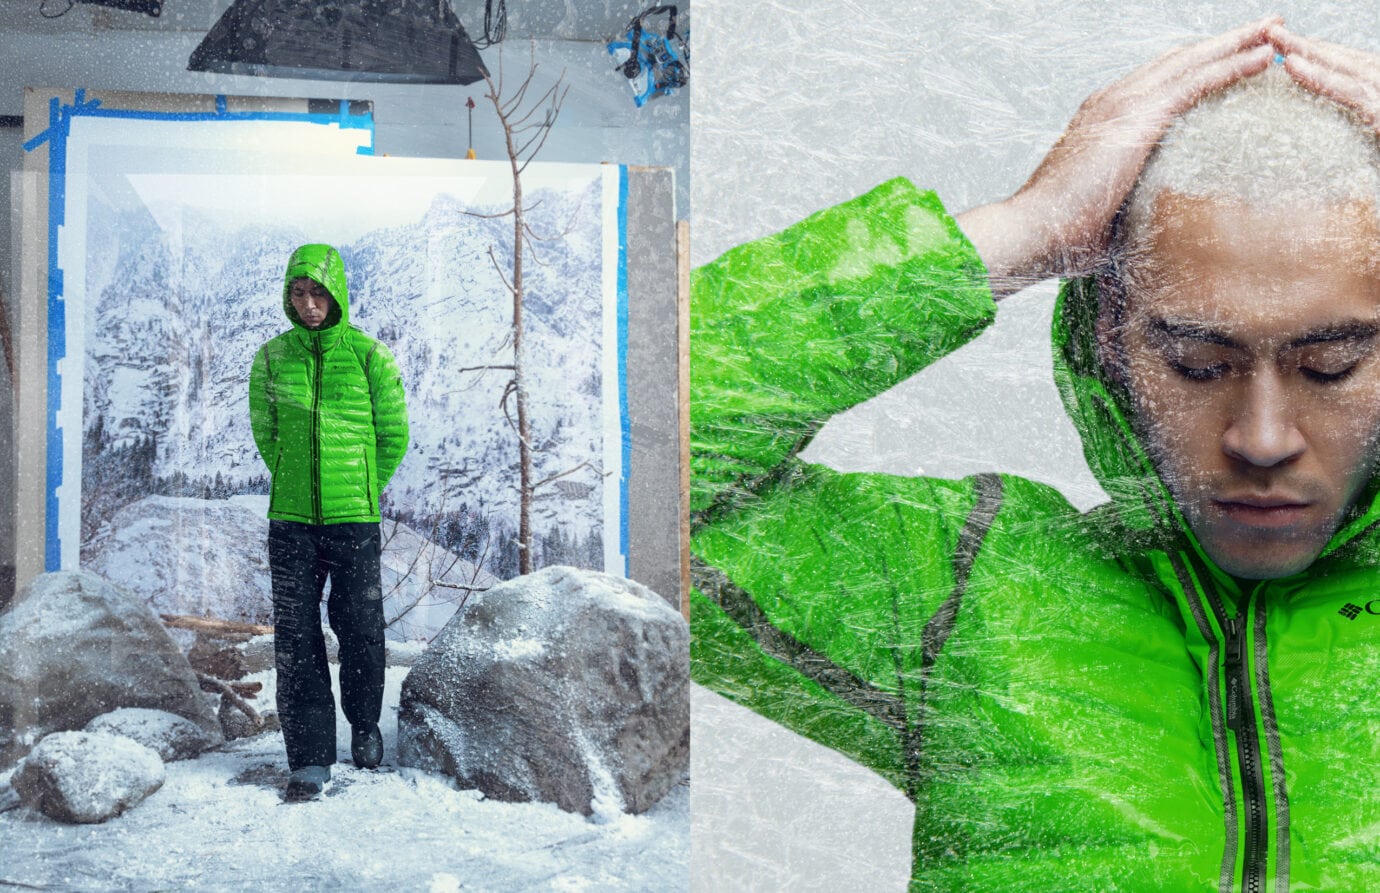 Outerwear_photograph_by_Rafael_Astorga_for_Columbia_sportswear_adverse_weather_effects_indoor_diorama